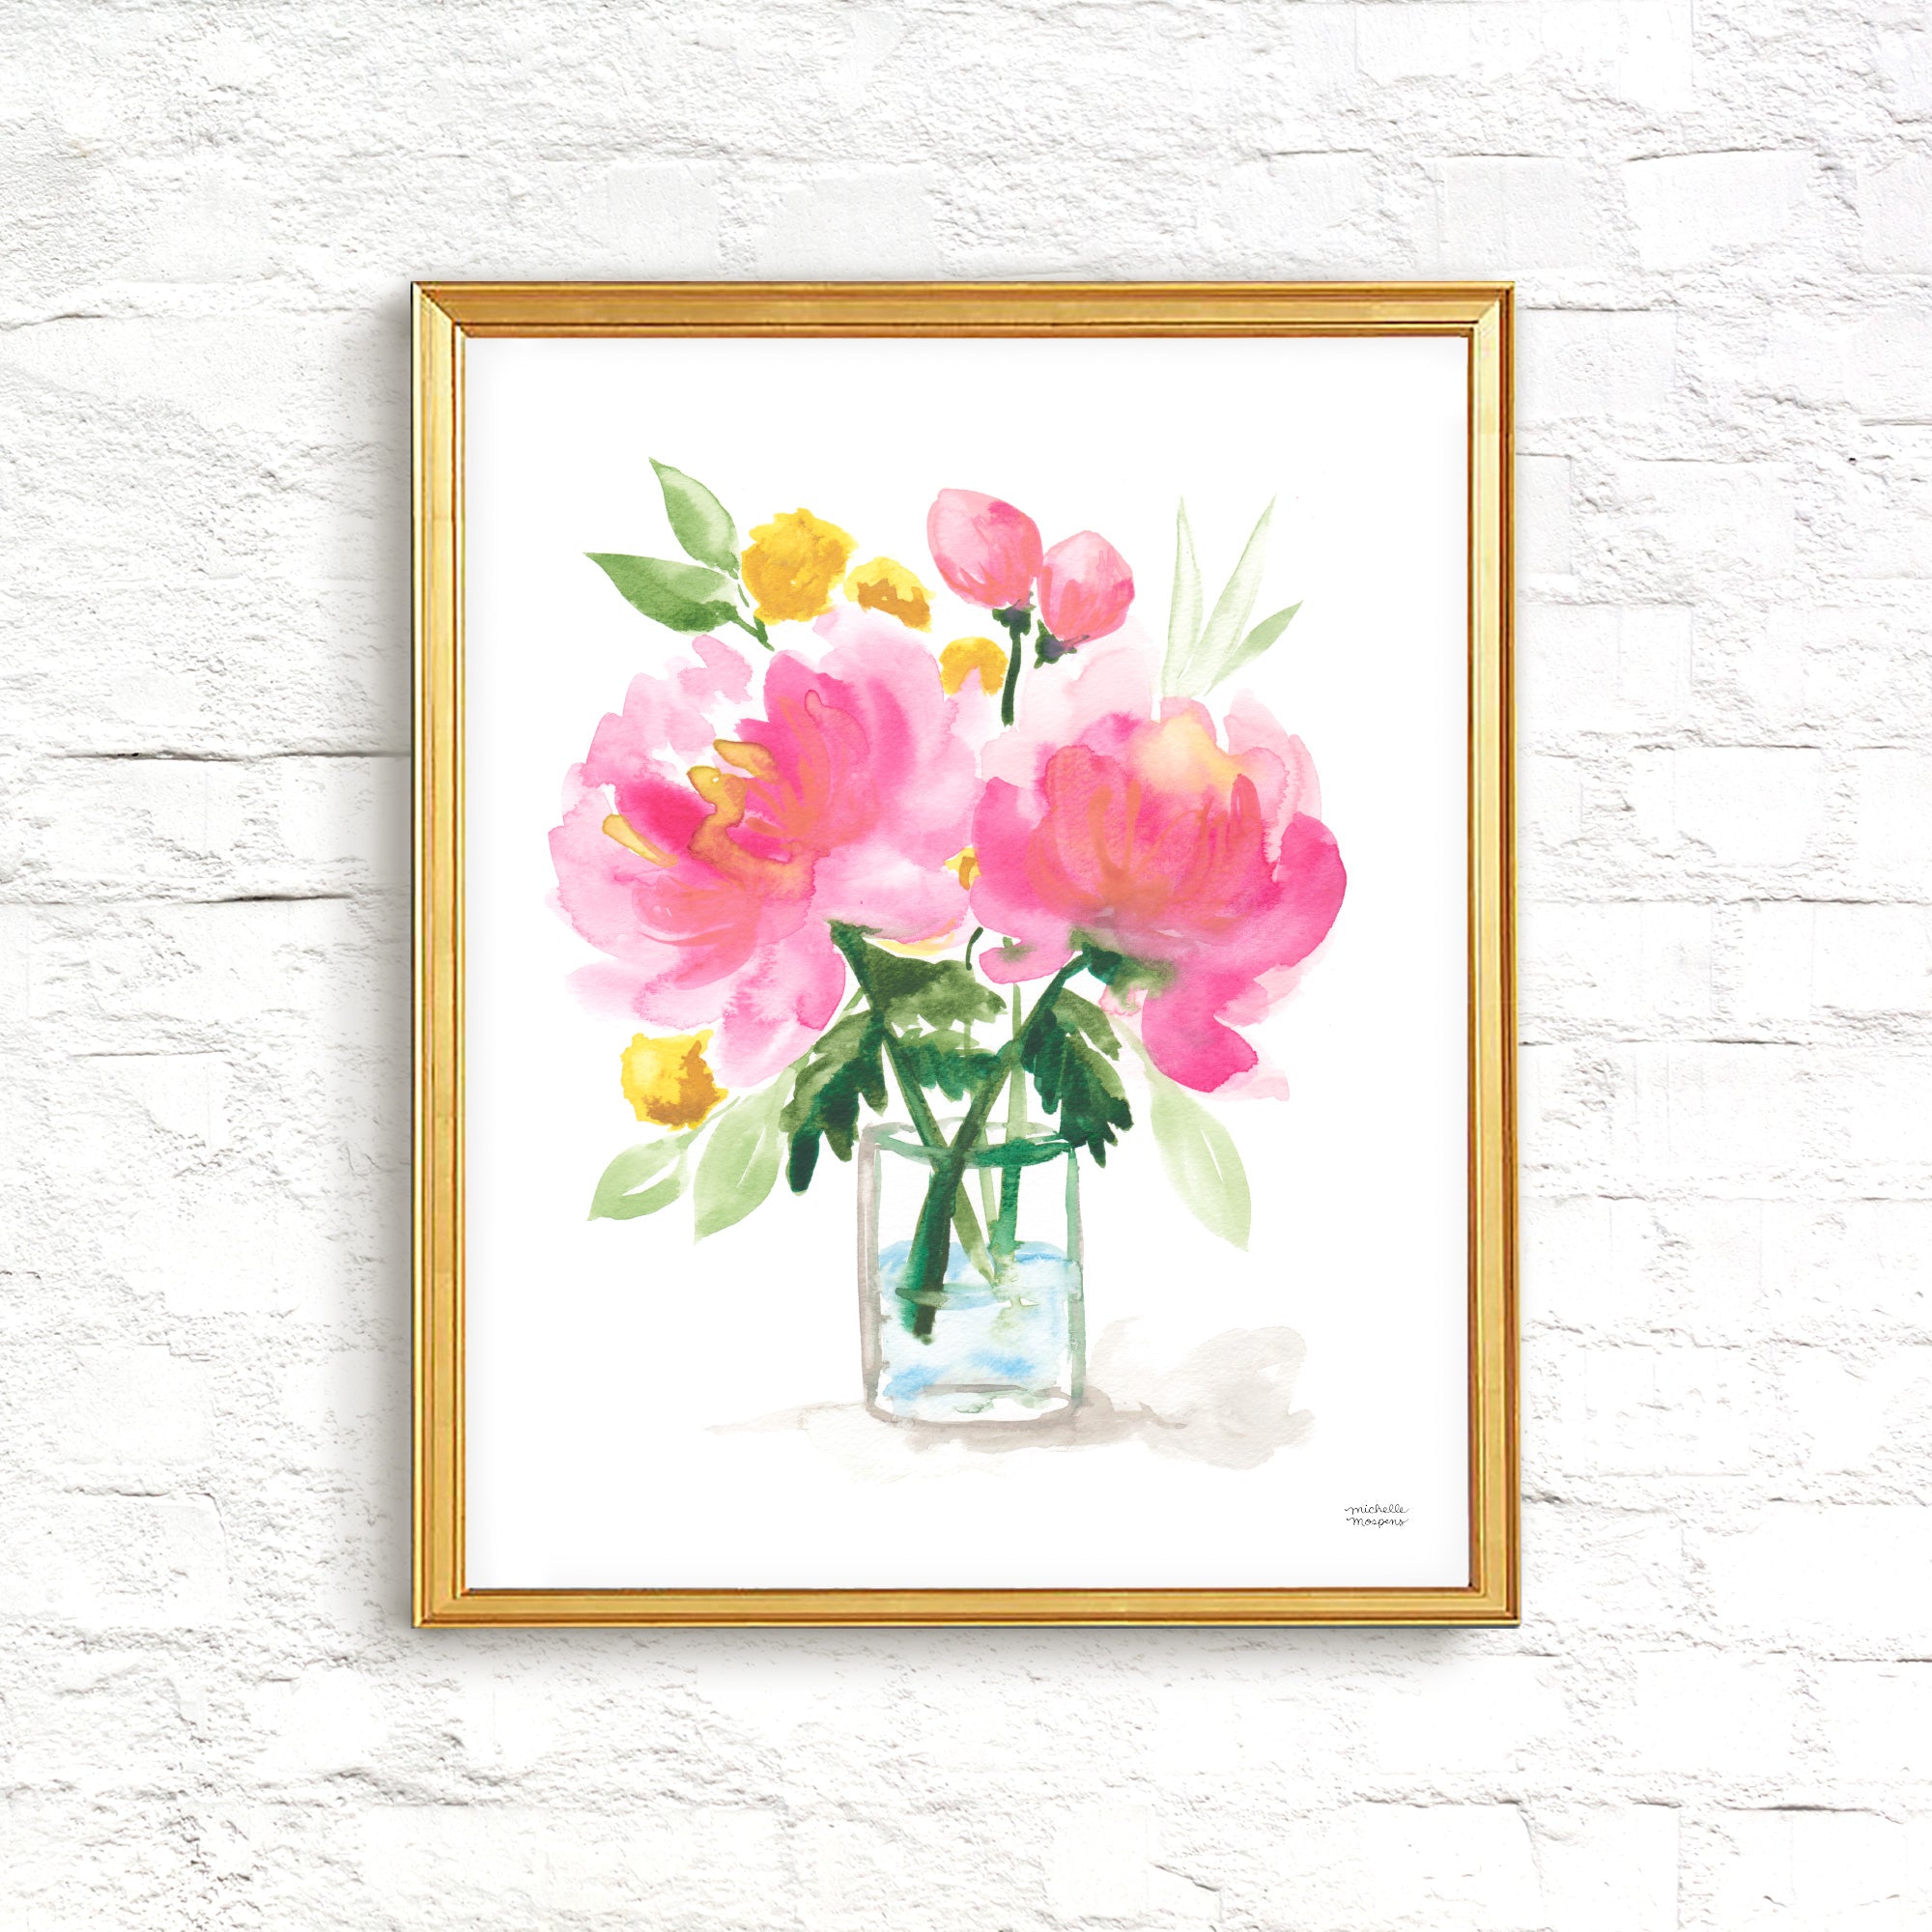 Painterly Pink Peony Floral Bouquet Wall Art Print by Michelle Mospens